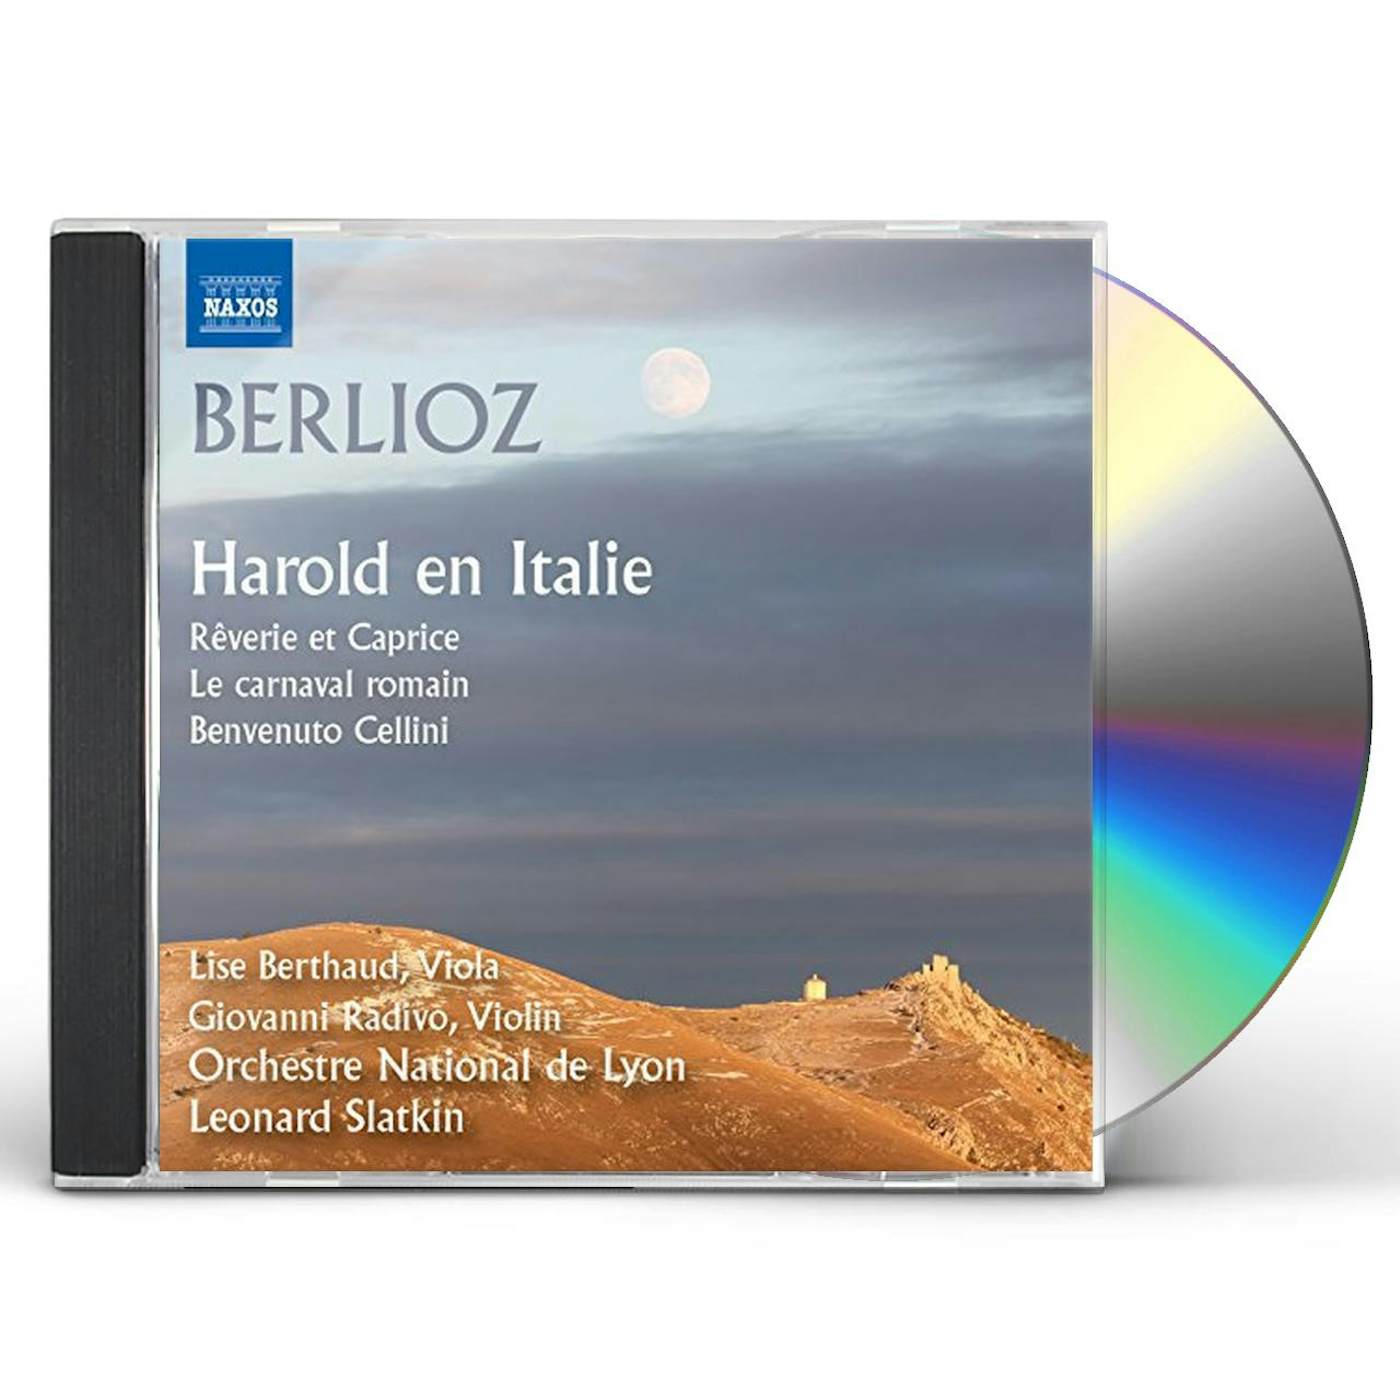 Berlioz WORKS FOR ORCH CD